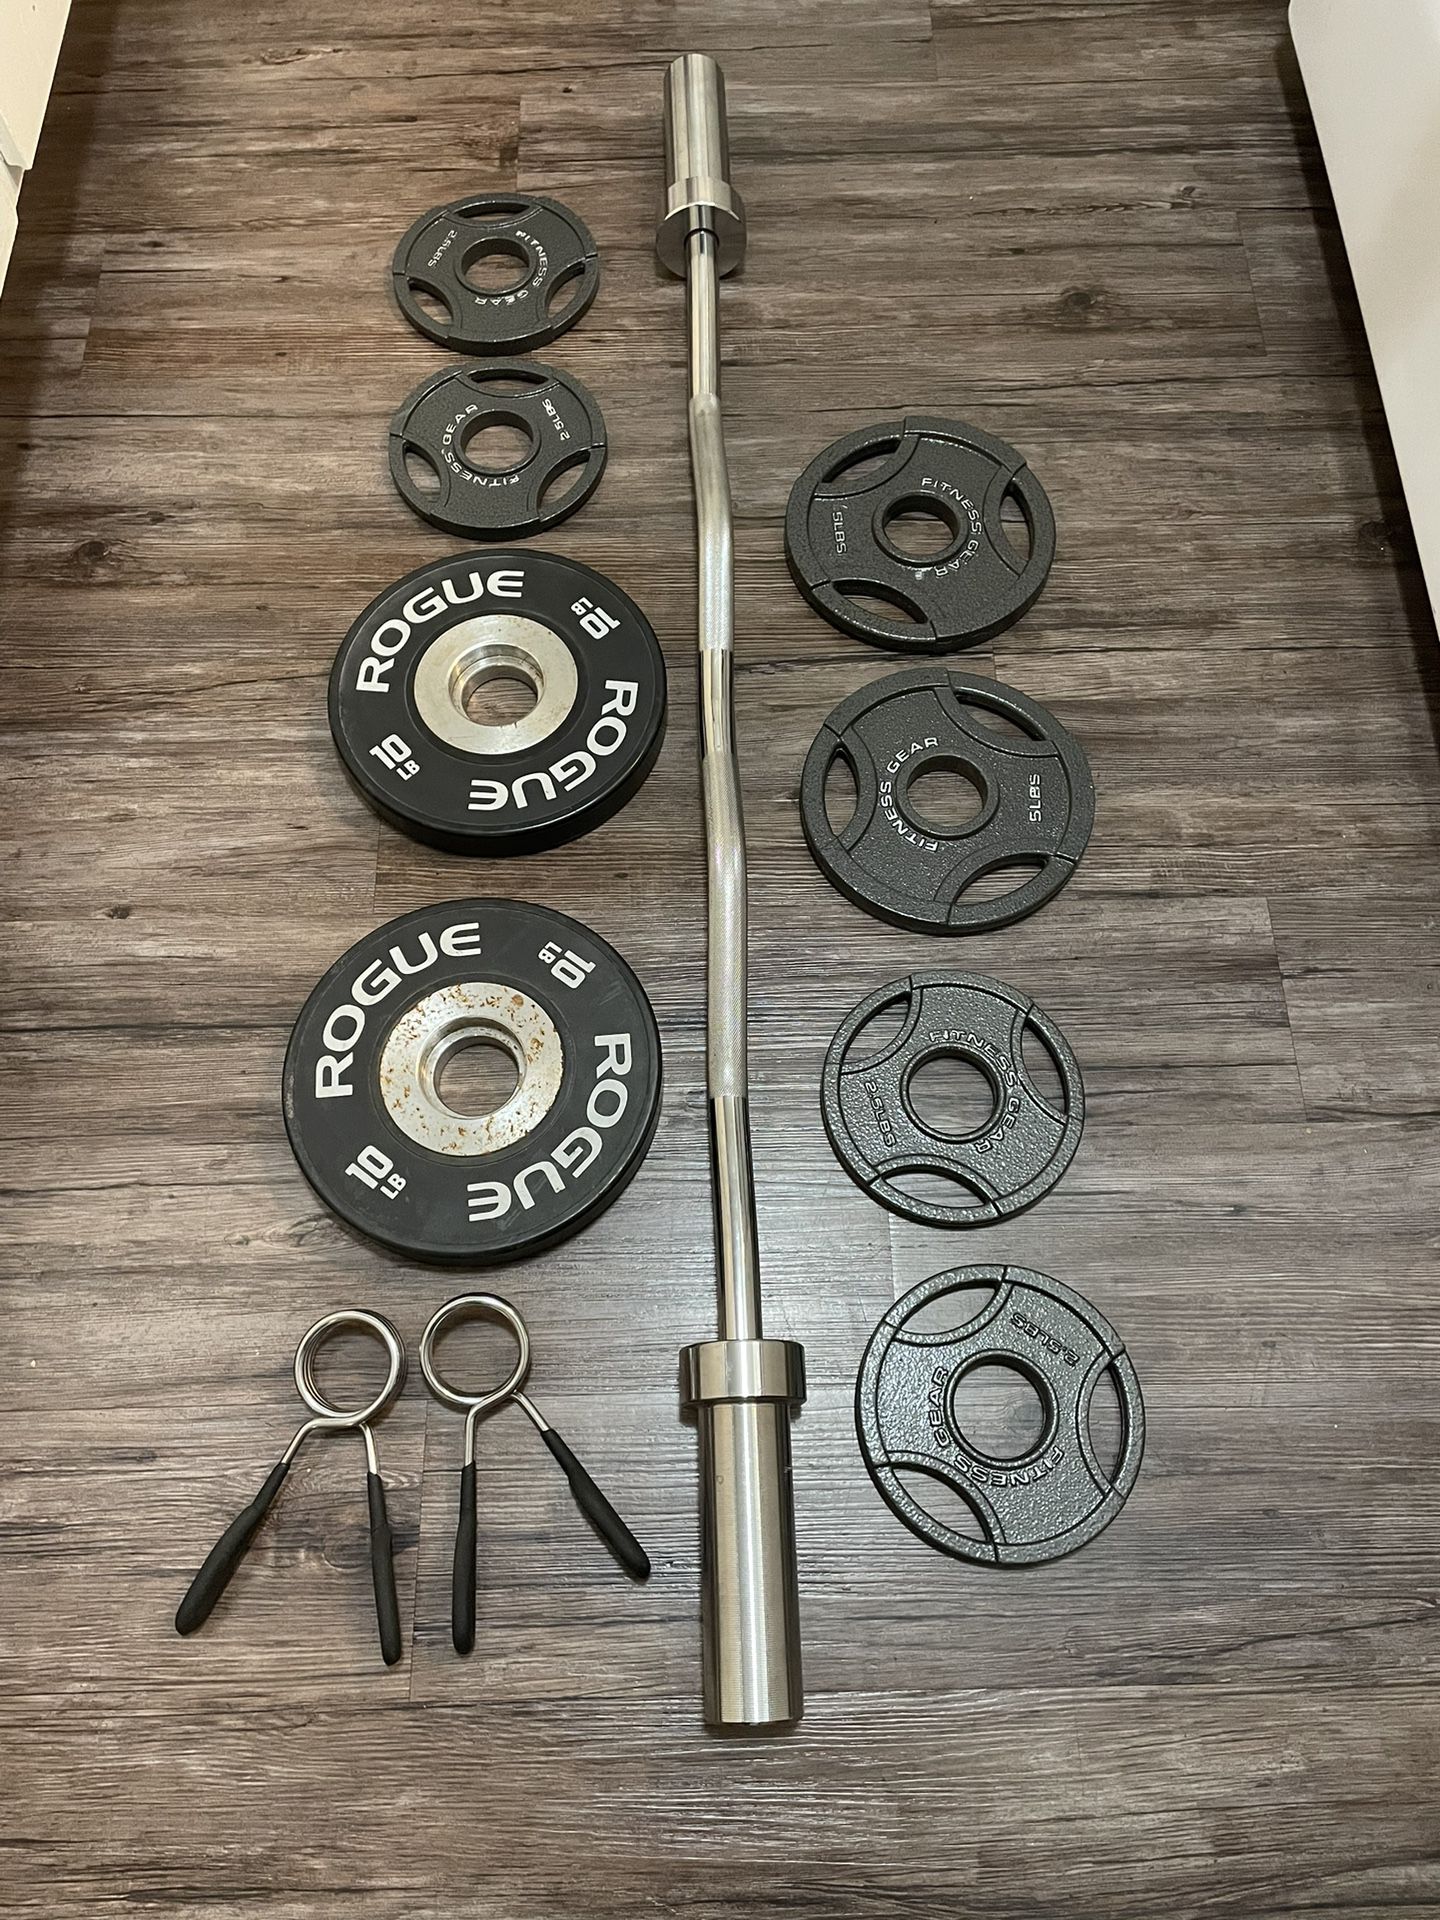 Olympic Weights With Curling Bar And Clips 2x10, 2x5 And 4x2.5 Lbs 